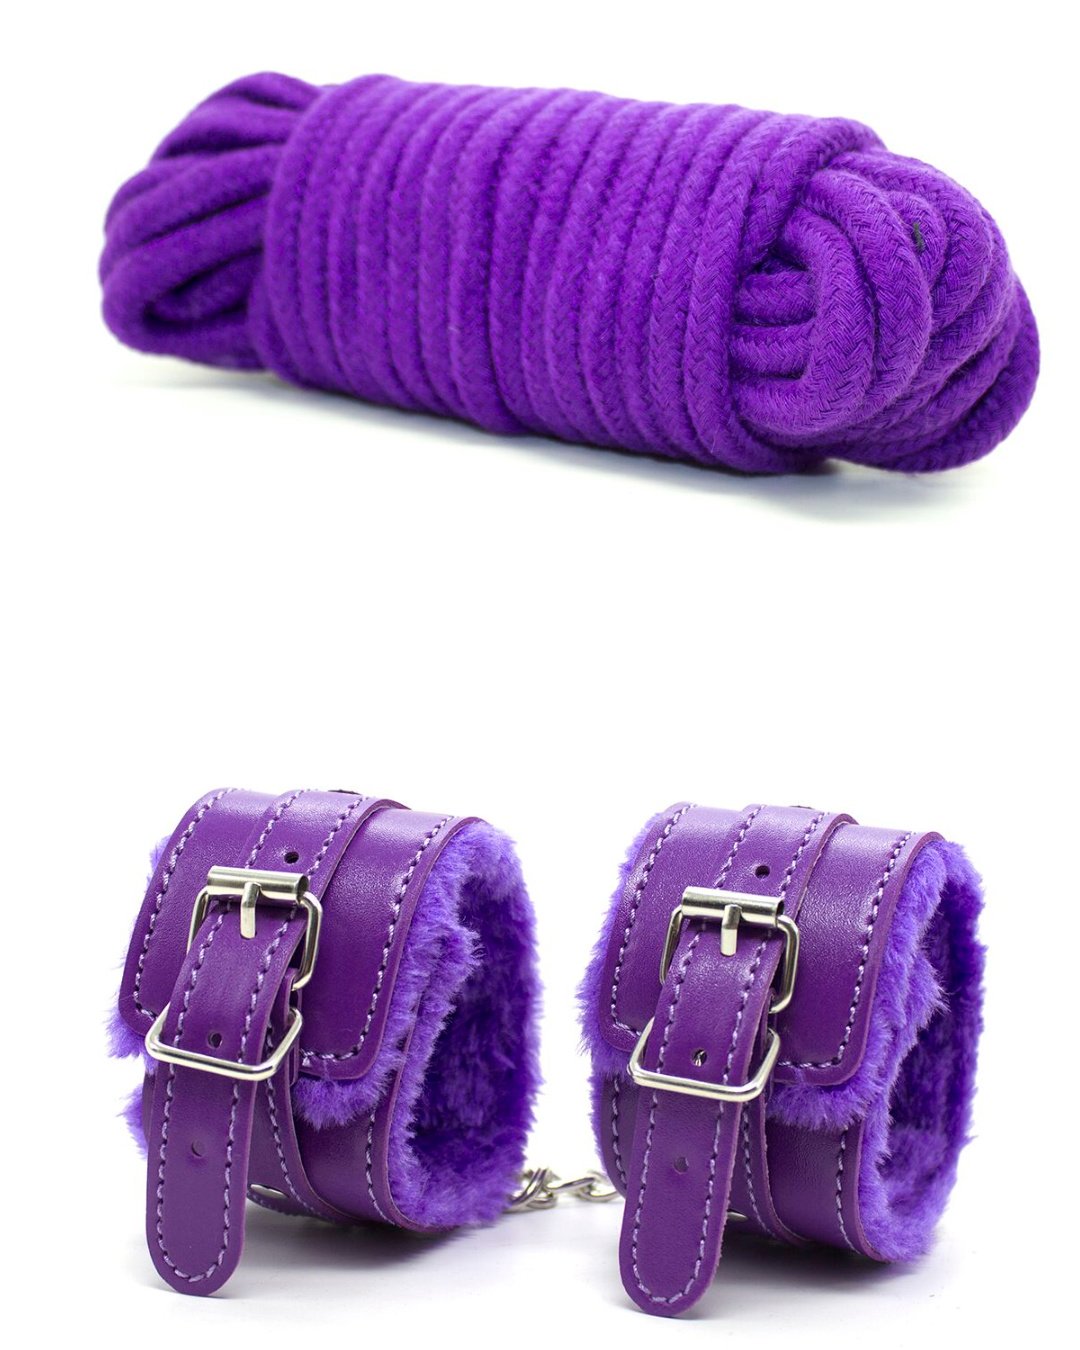 Rope and cuffs from the Everything Bondage 9 Piece Beginner's Bondage Kit - Purple